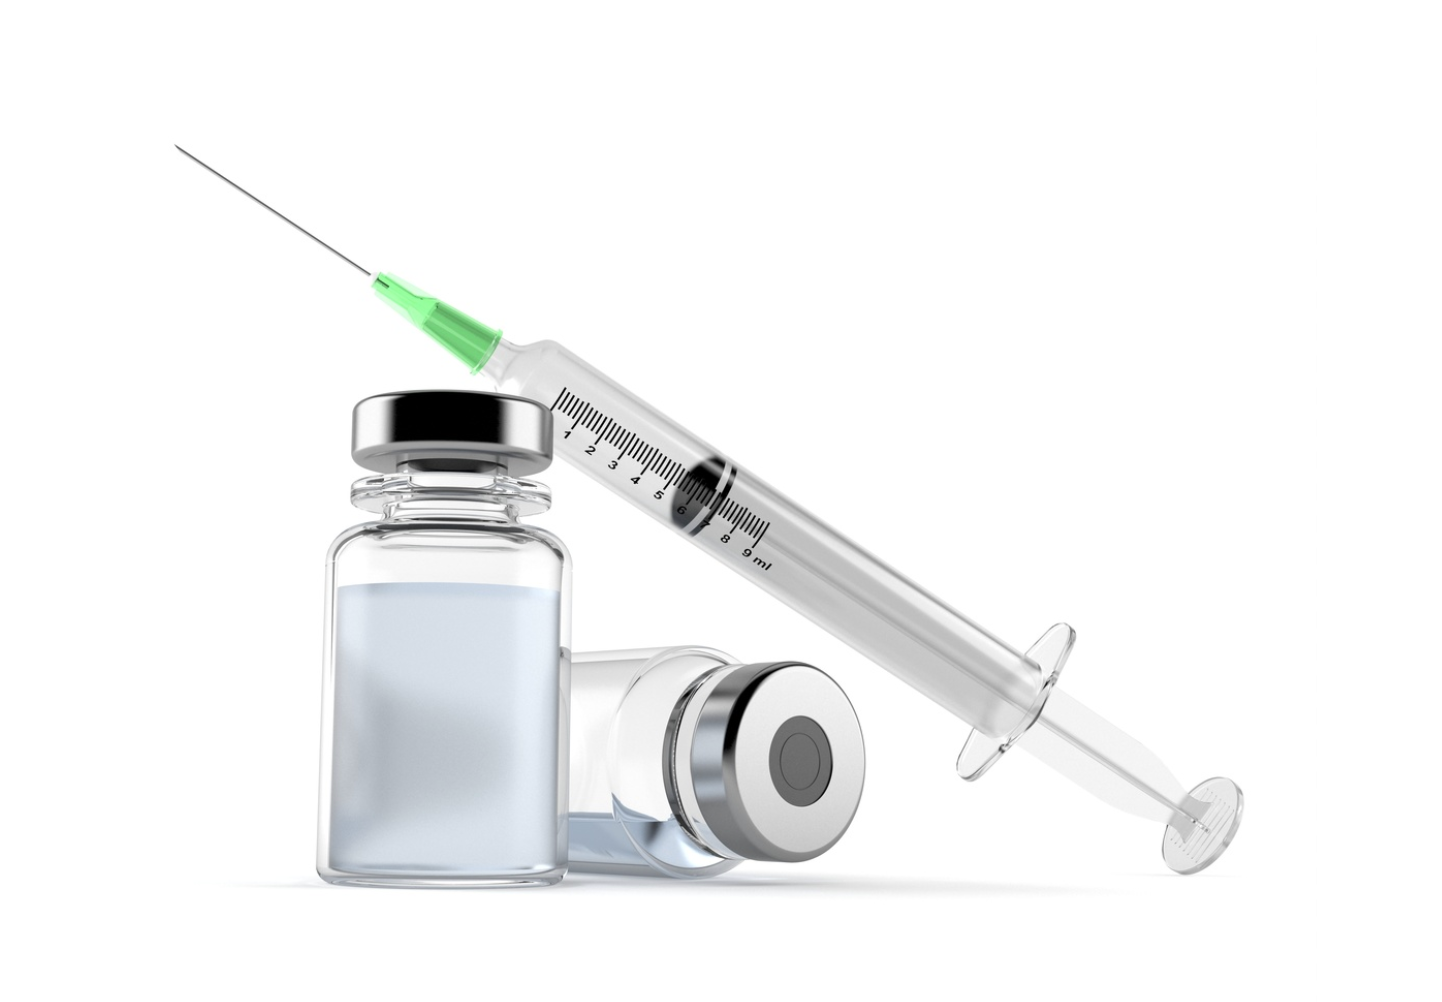 Unvaccinated First Responders Have Higher Risk, Incidence of COVID-19 Infection